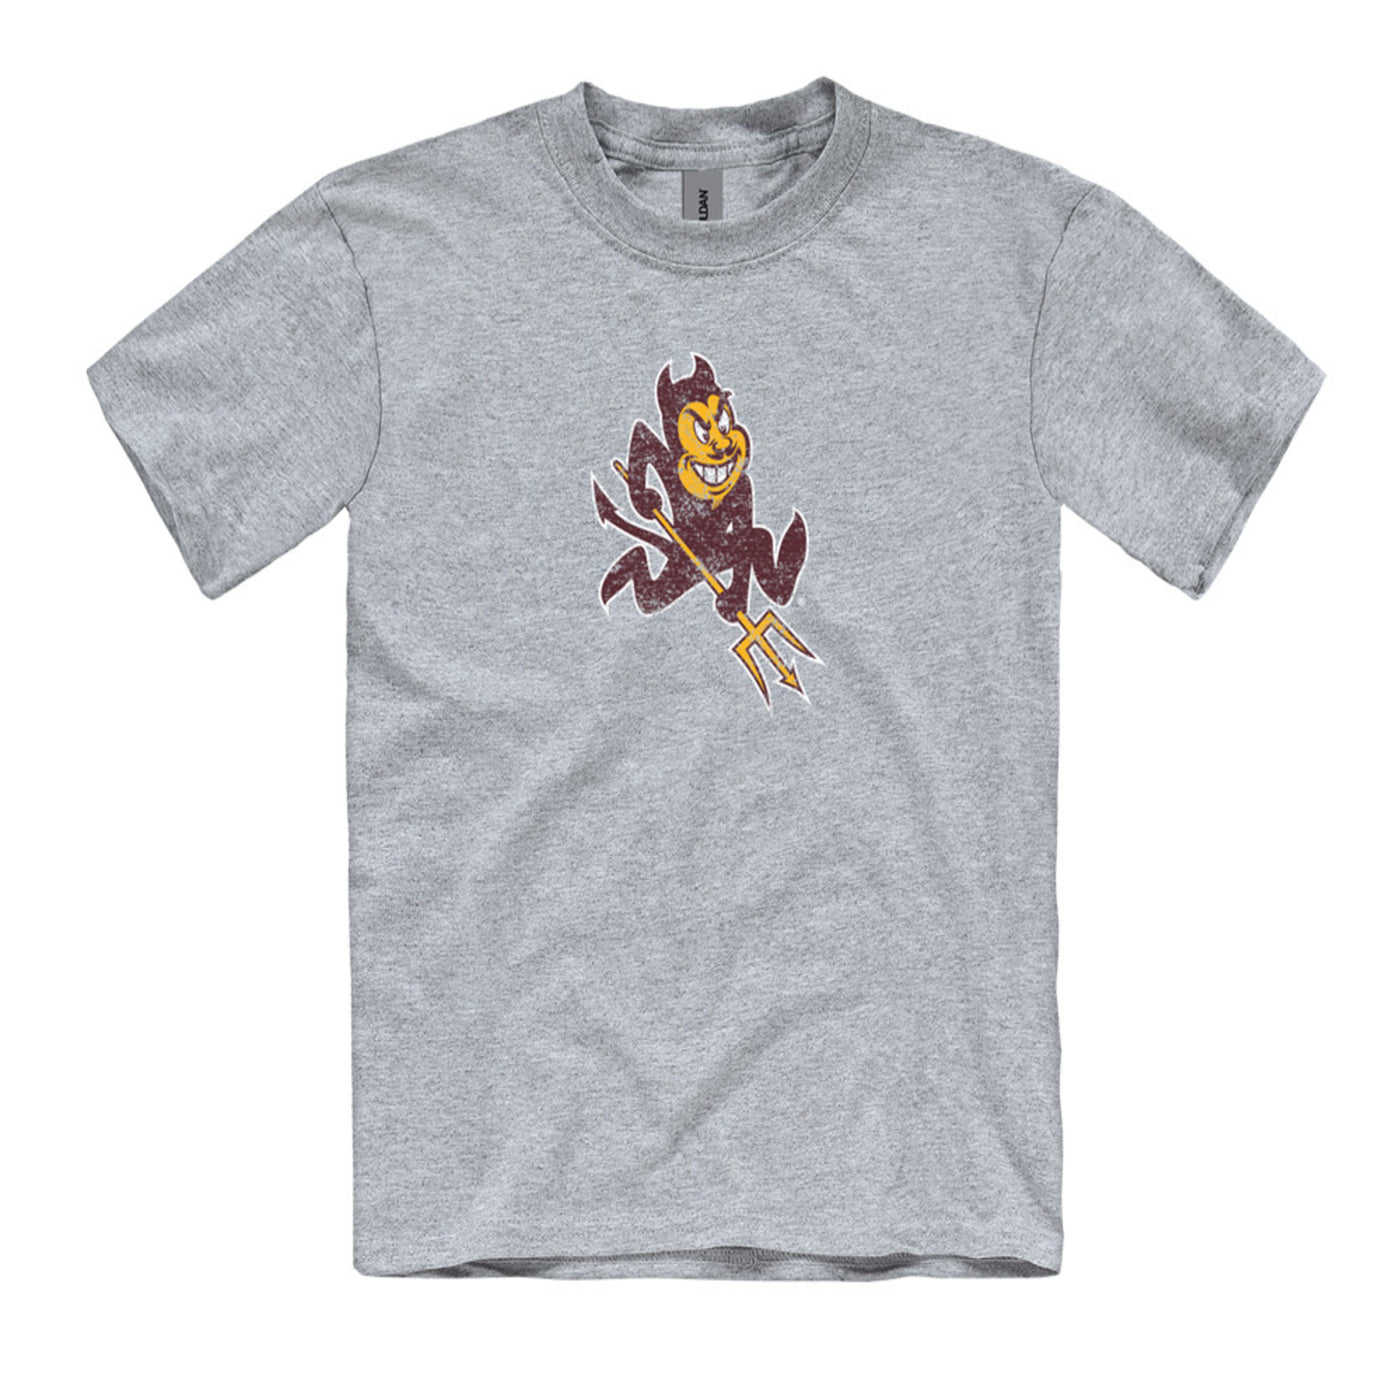 ASU grey youth t-shirt with a sparky mascot on the front.